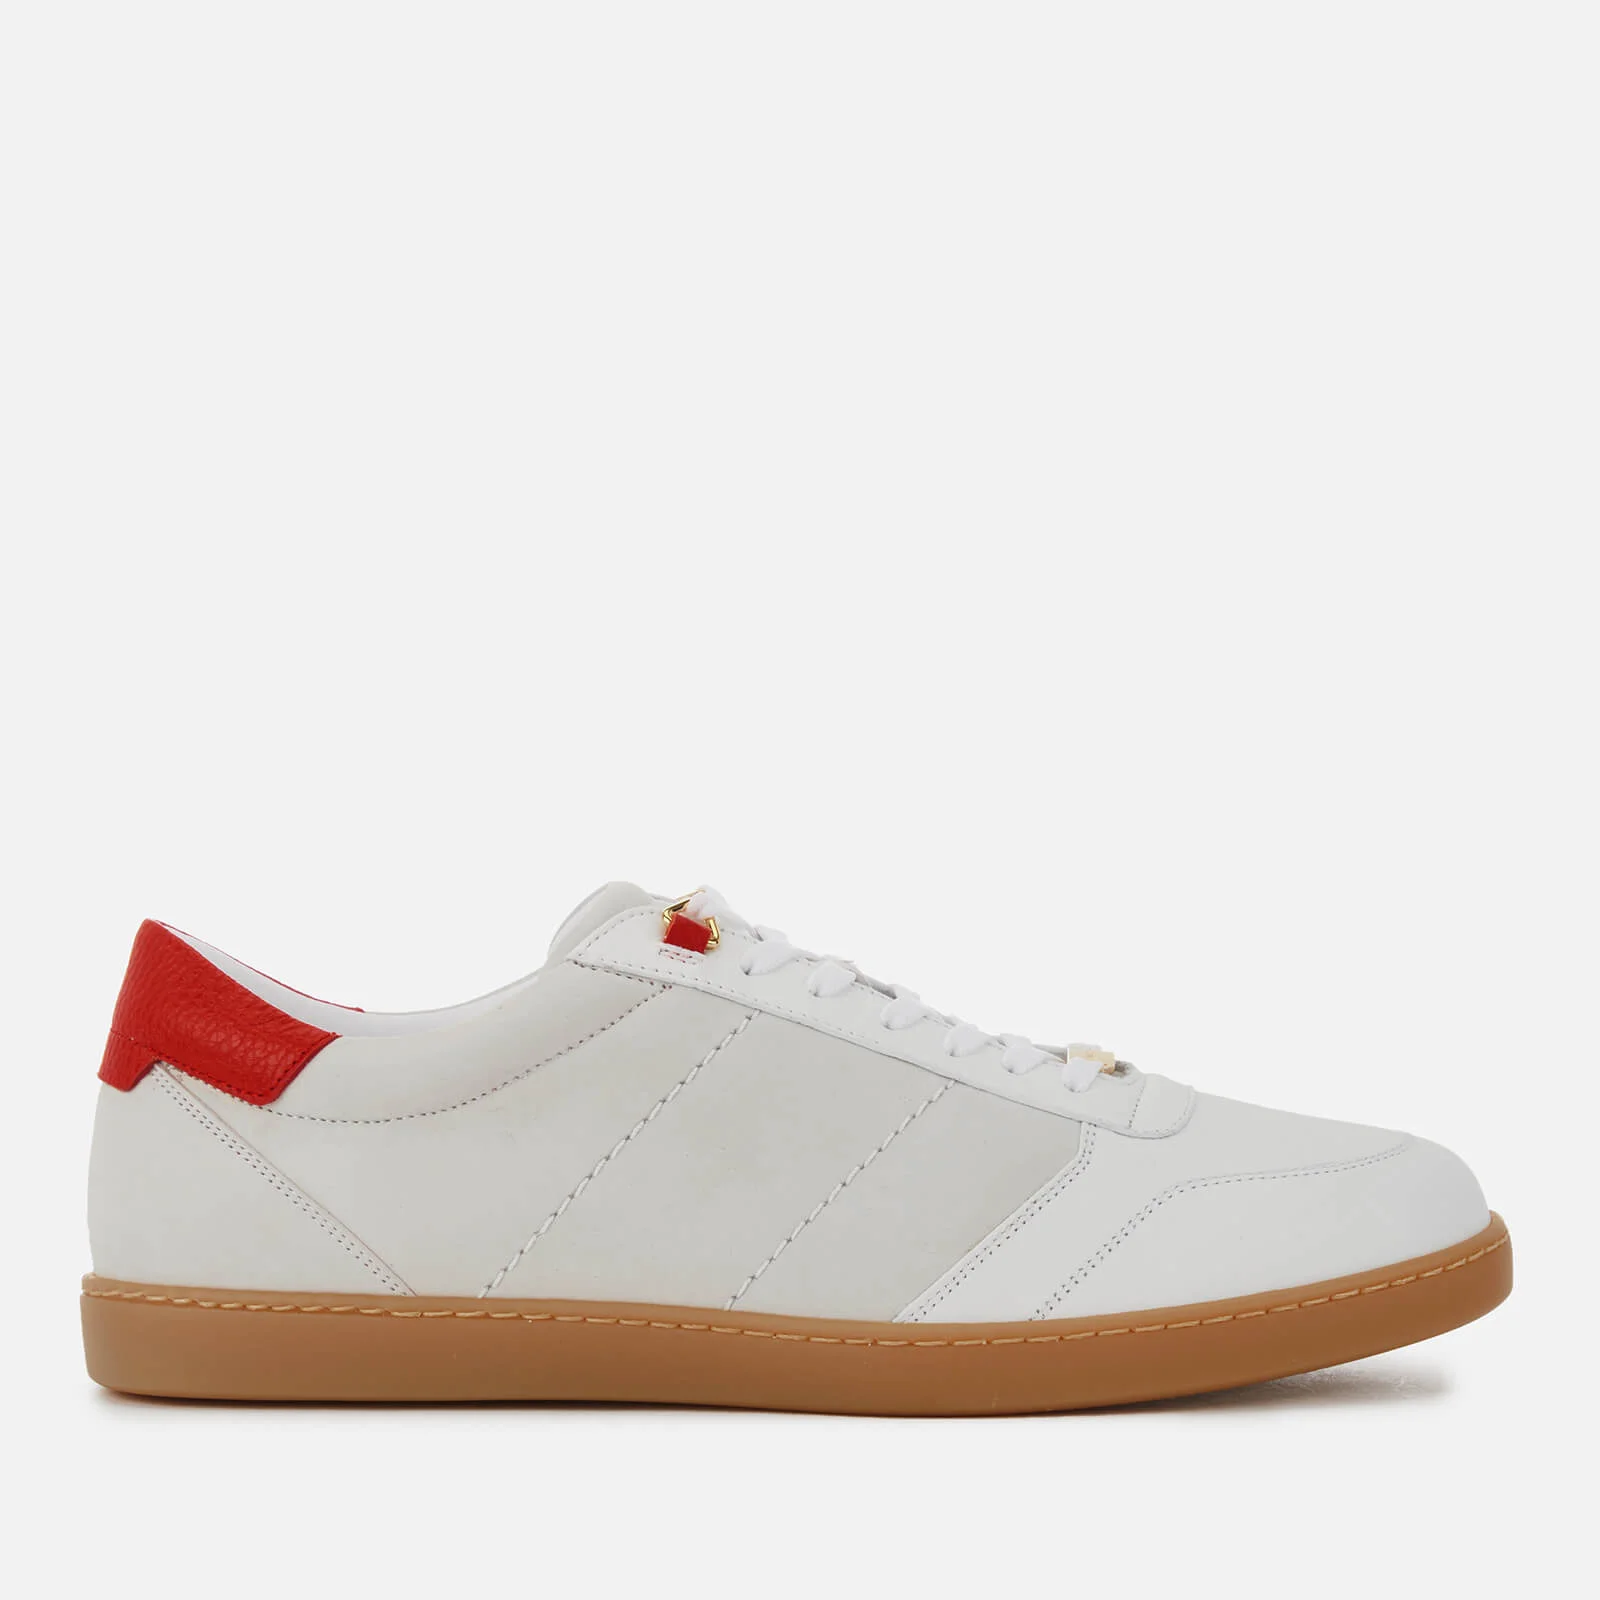 Buscemi Men's Box Low Top Trainers - White/Red Image 1